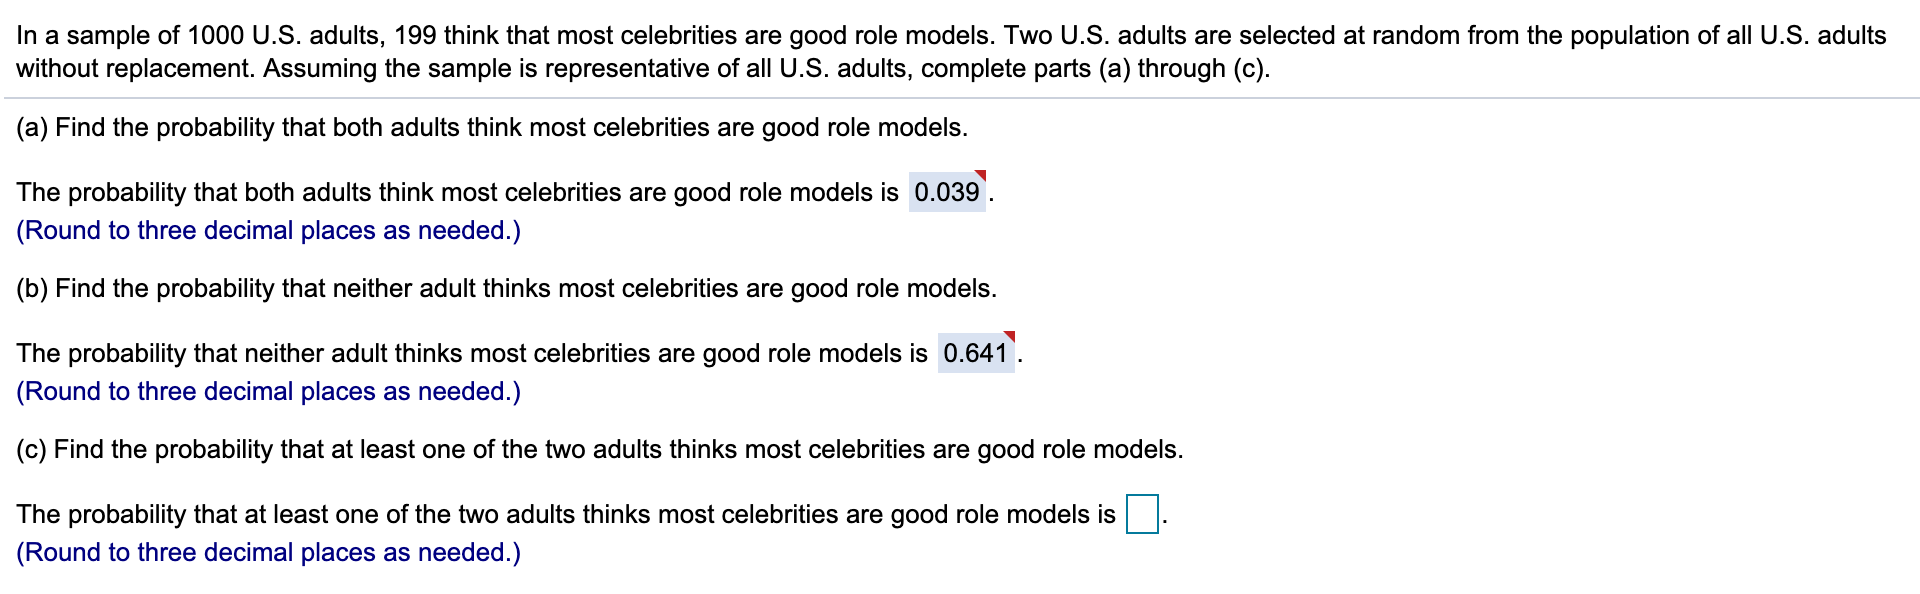 In a sample of 1000 U.S. adults, 199 think that most celebrities are good role models. Two U.S. adults are selected at random from the population of all U.S. adults
without replacement. Assuming the sample is representative of all U.S. adults, complete parts (a) through (c)
(a) Find the probability that both adults think most celebrities are good role models.
The probability that both adults think most celebrities are good role models is 0.039
(Round to three decimal places as needed.)
(b) Find the probability that neither adult thinks most celebrities are good role models.
The probability that neither adult thinks most celebrities are good role models is 0.641
(Round to three decimal places as needed.)
(c) Find the probability that at least one of the two adults thinks most celebrities are good role models.
The probability that at least one of the two adults thinks most celebrities are good role models is
(Round to three decimal places as needed.)
